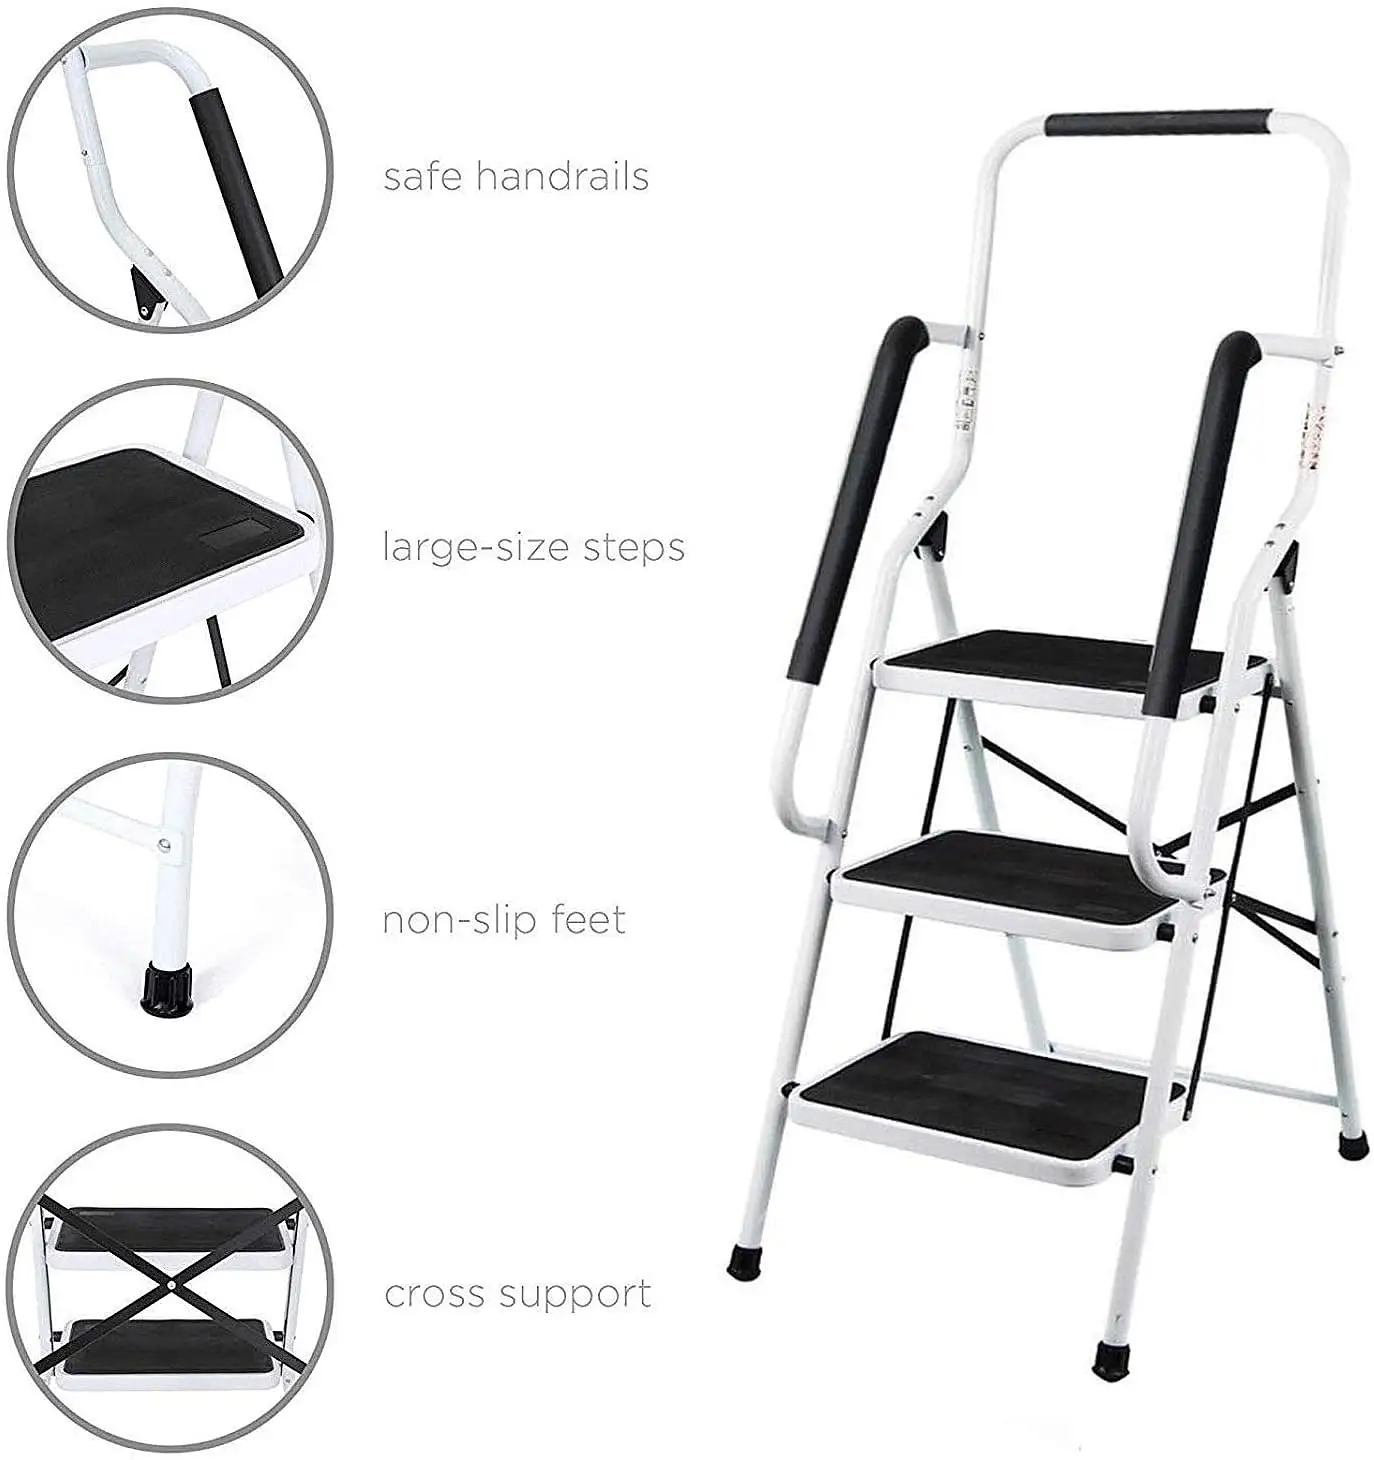 3 Step Ladder, Heavy Duty Steel Folding with Anti-Slip Rubber Mat And Safety Handrail - 150kg/330lbs Load manufacturer